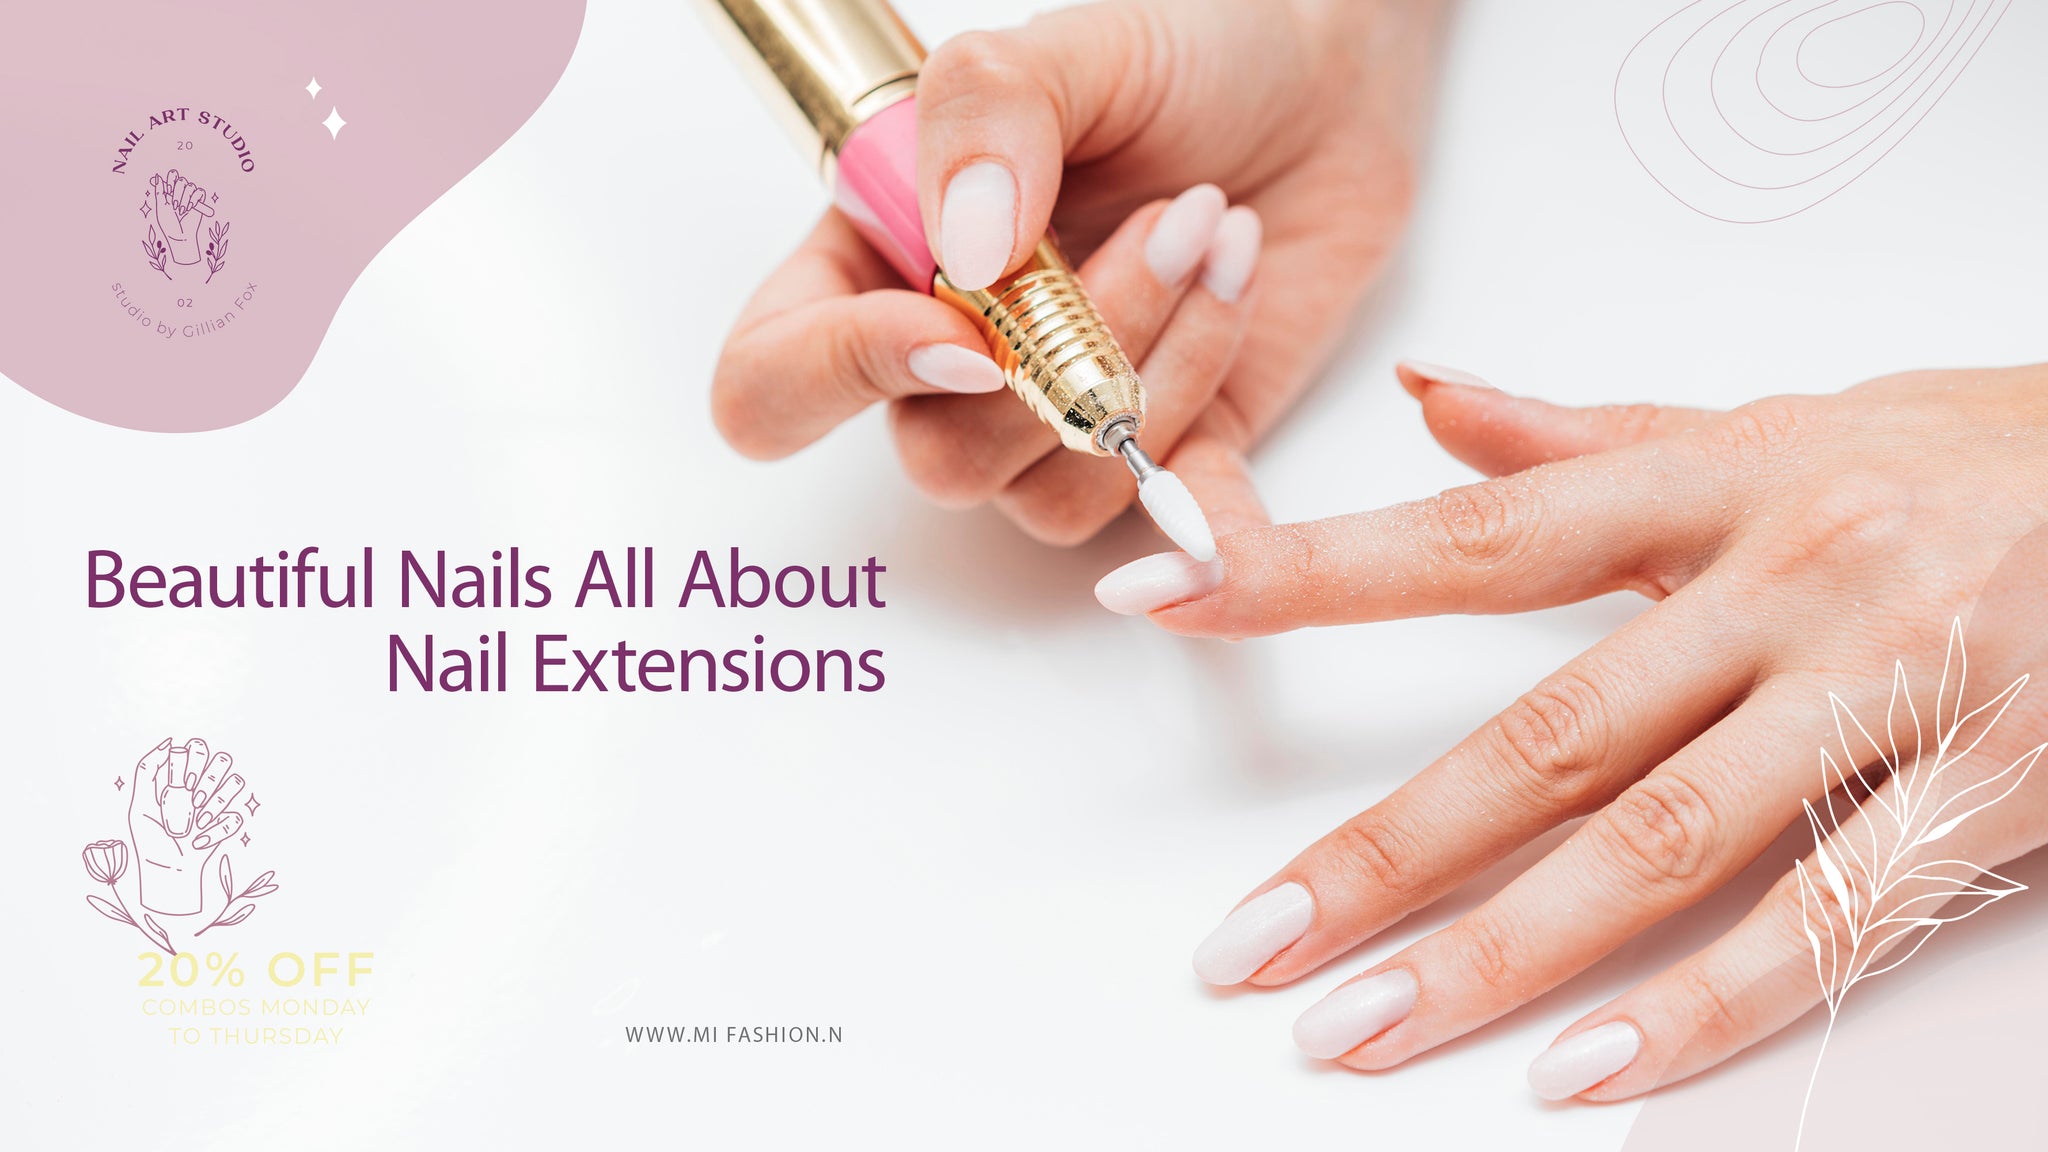 Beautiful Nails: All About Nail Extensions